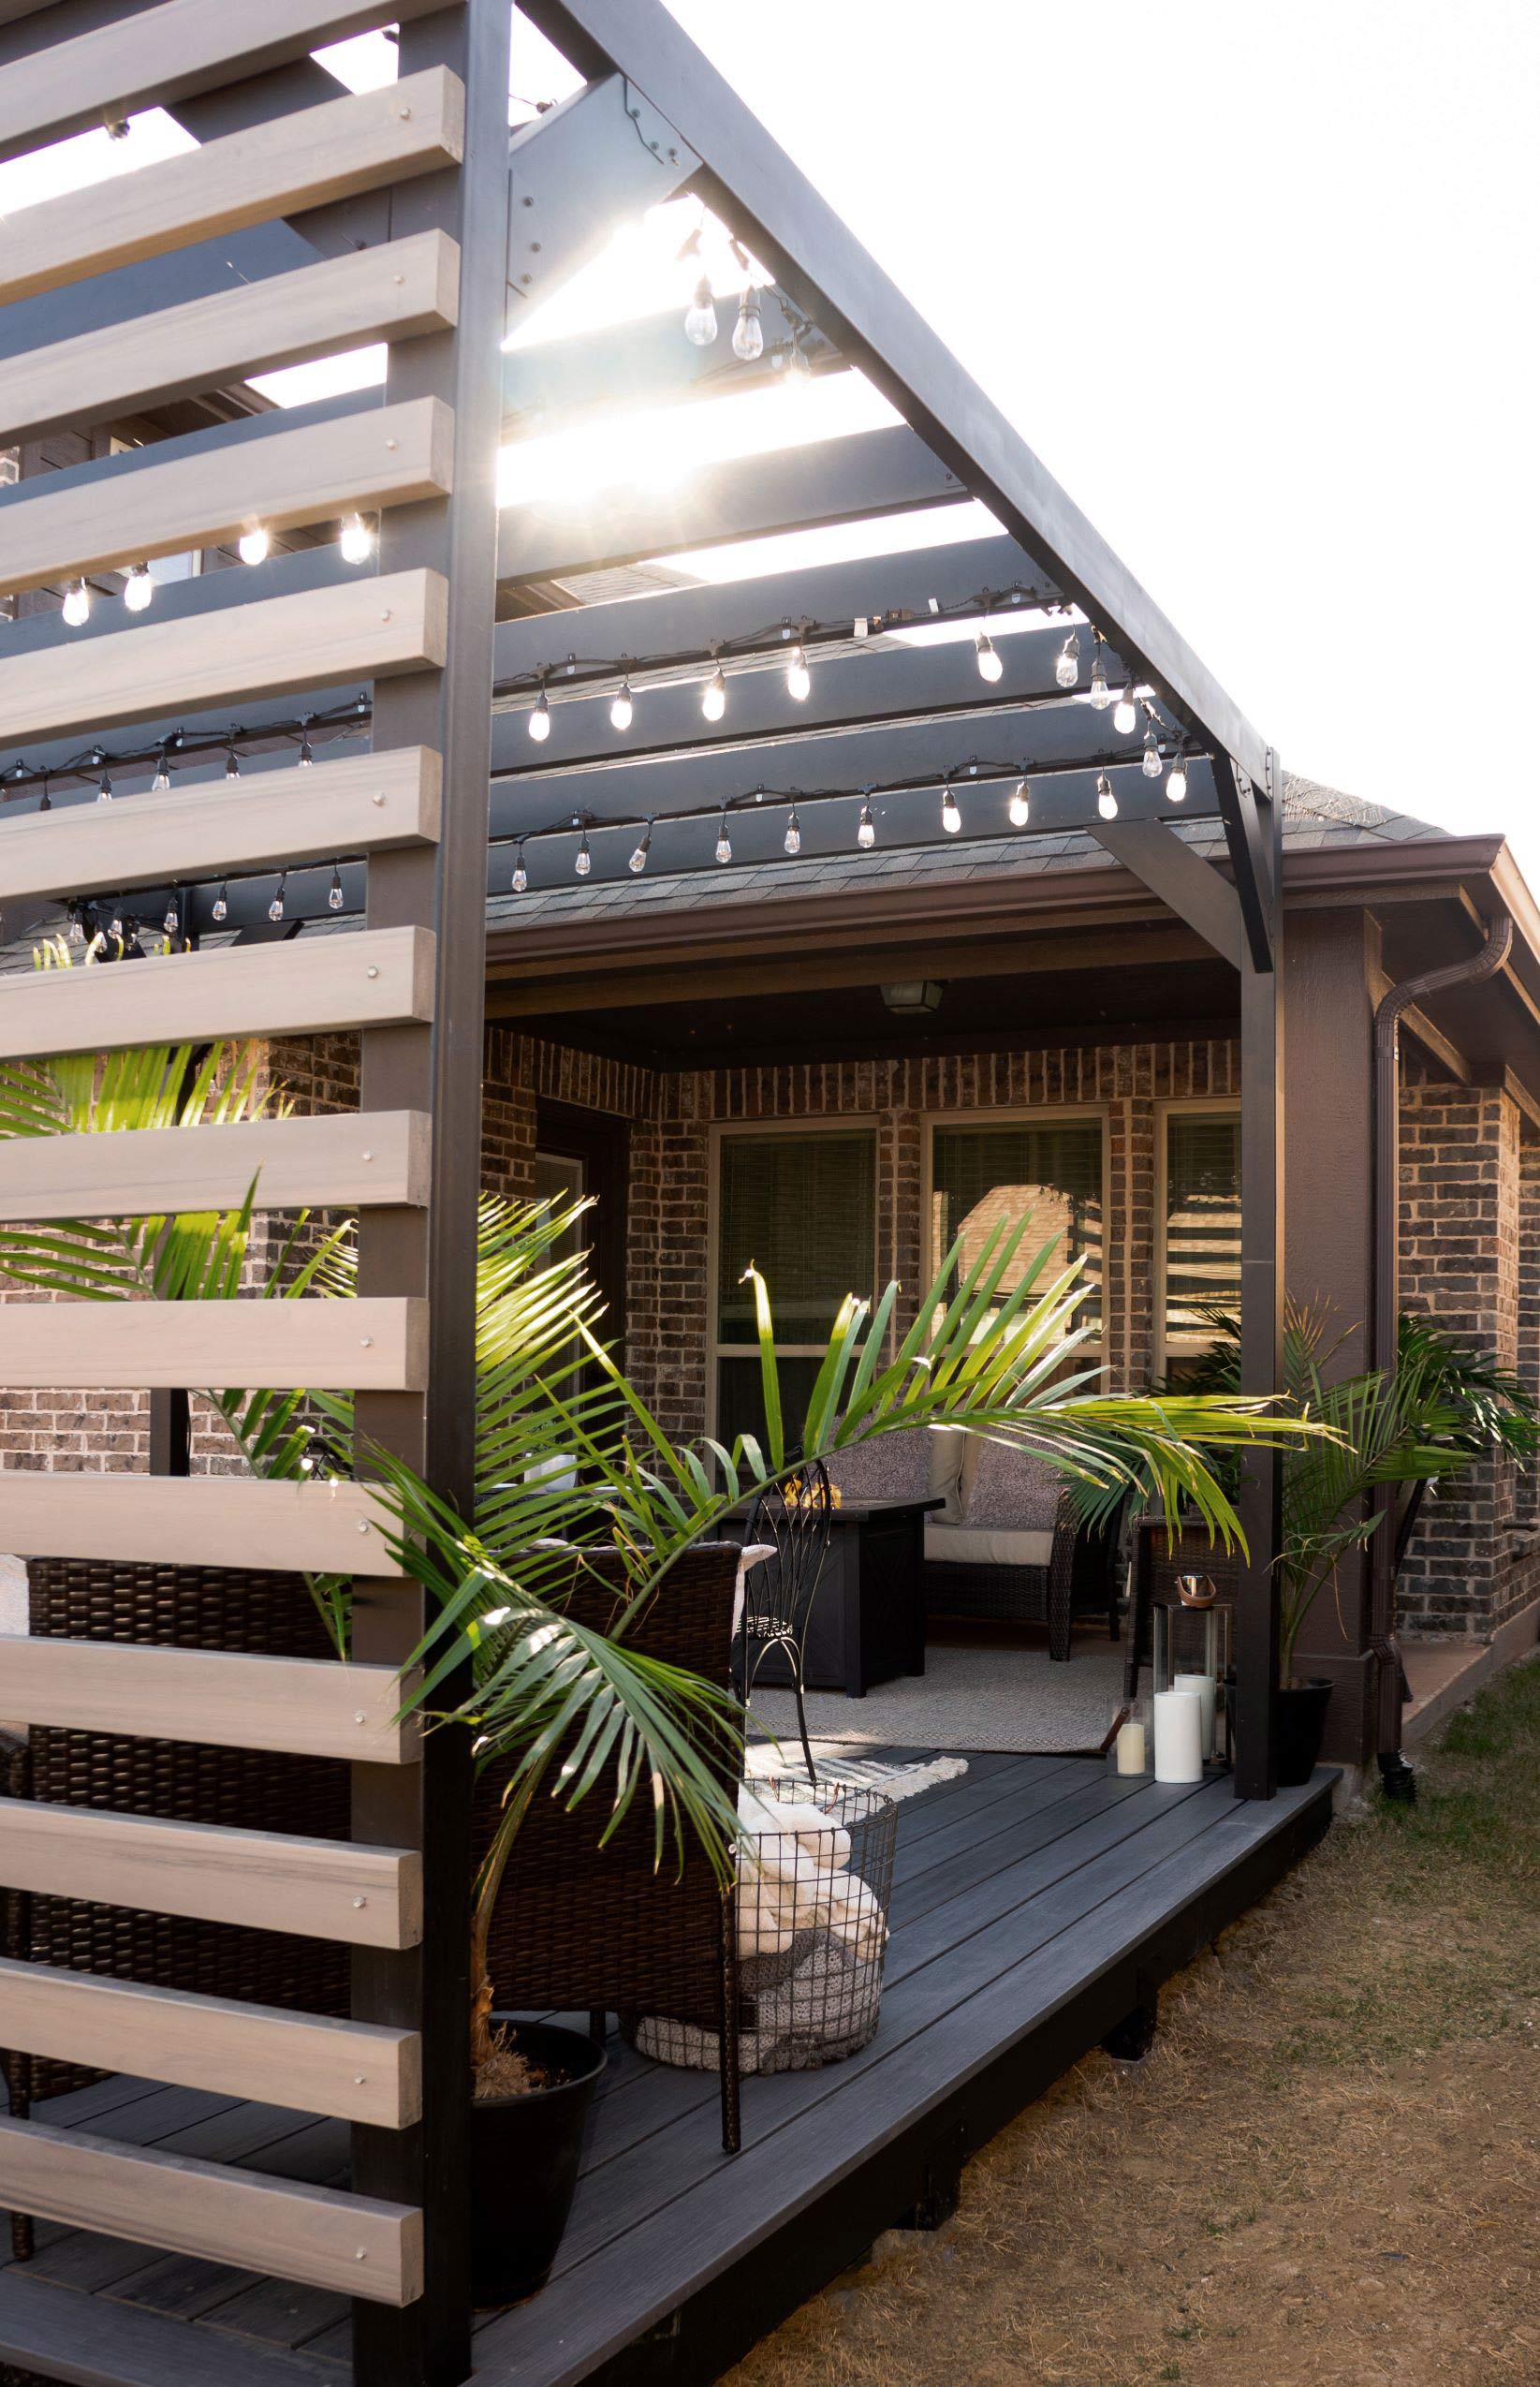 Modern steel pergola extending the outdoor living space with couches and greenery.